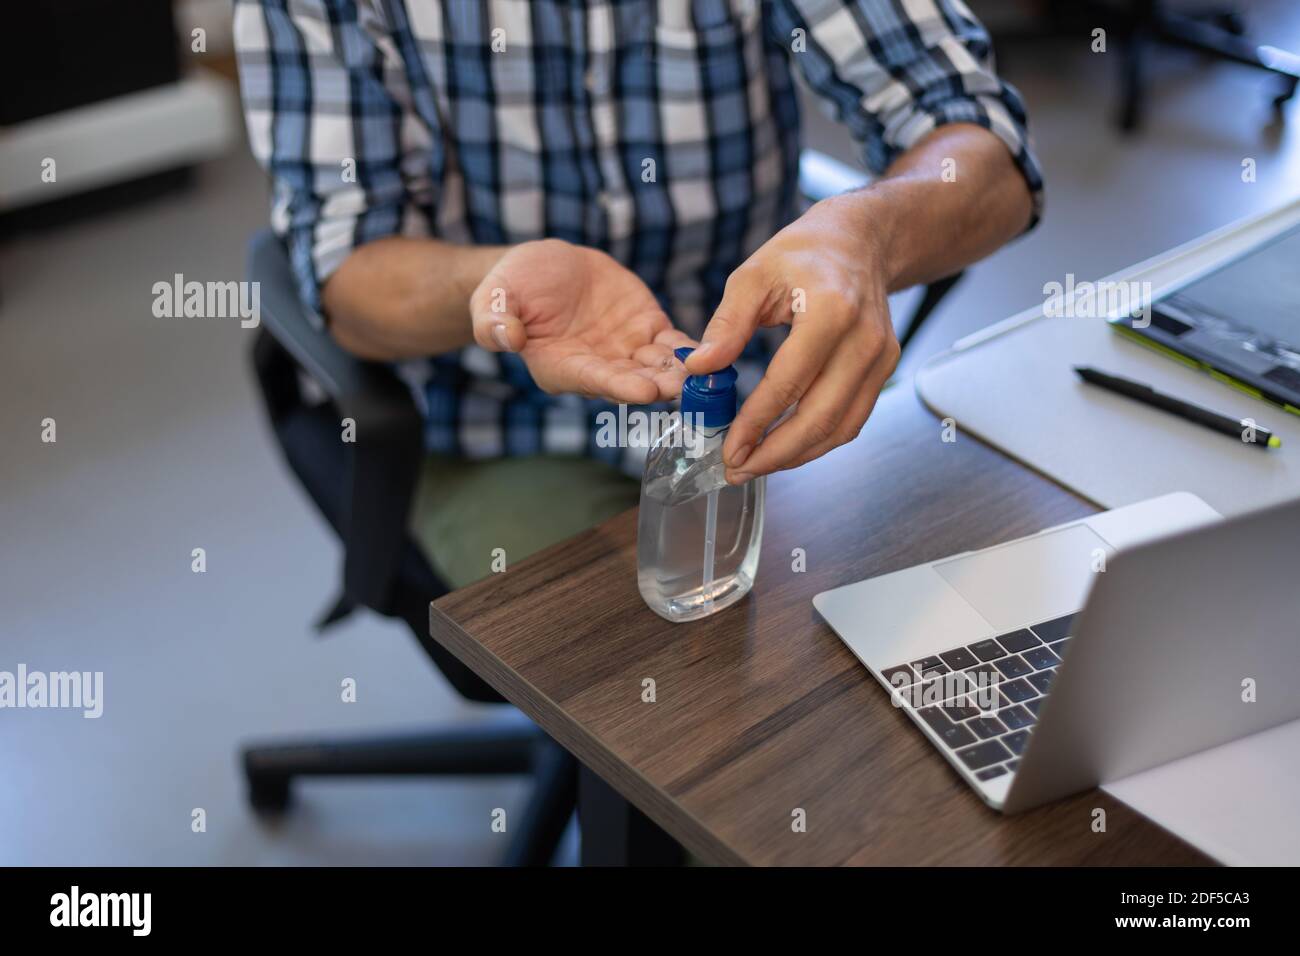 Caucasian man disinfecting his hands in an office Stock Photo